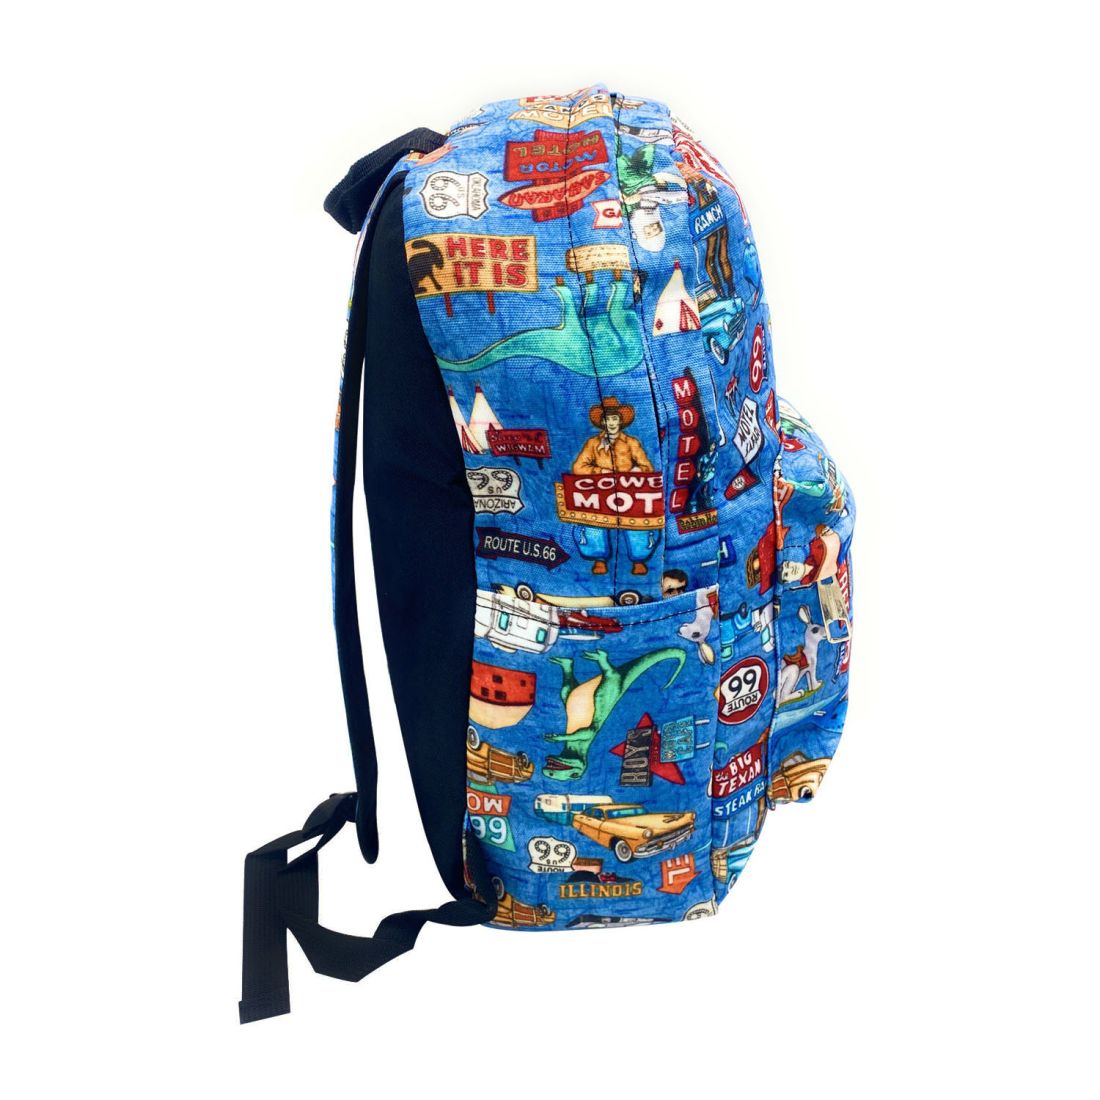 Empire Cove Historic Route 66 Sign School Backpack Patriotic Book Bag Gifts Blue